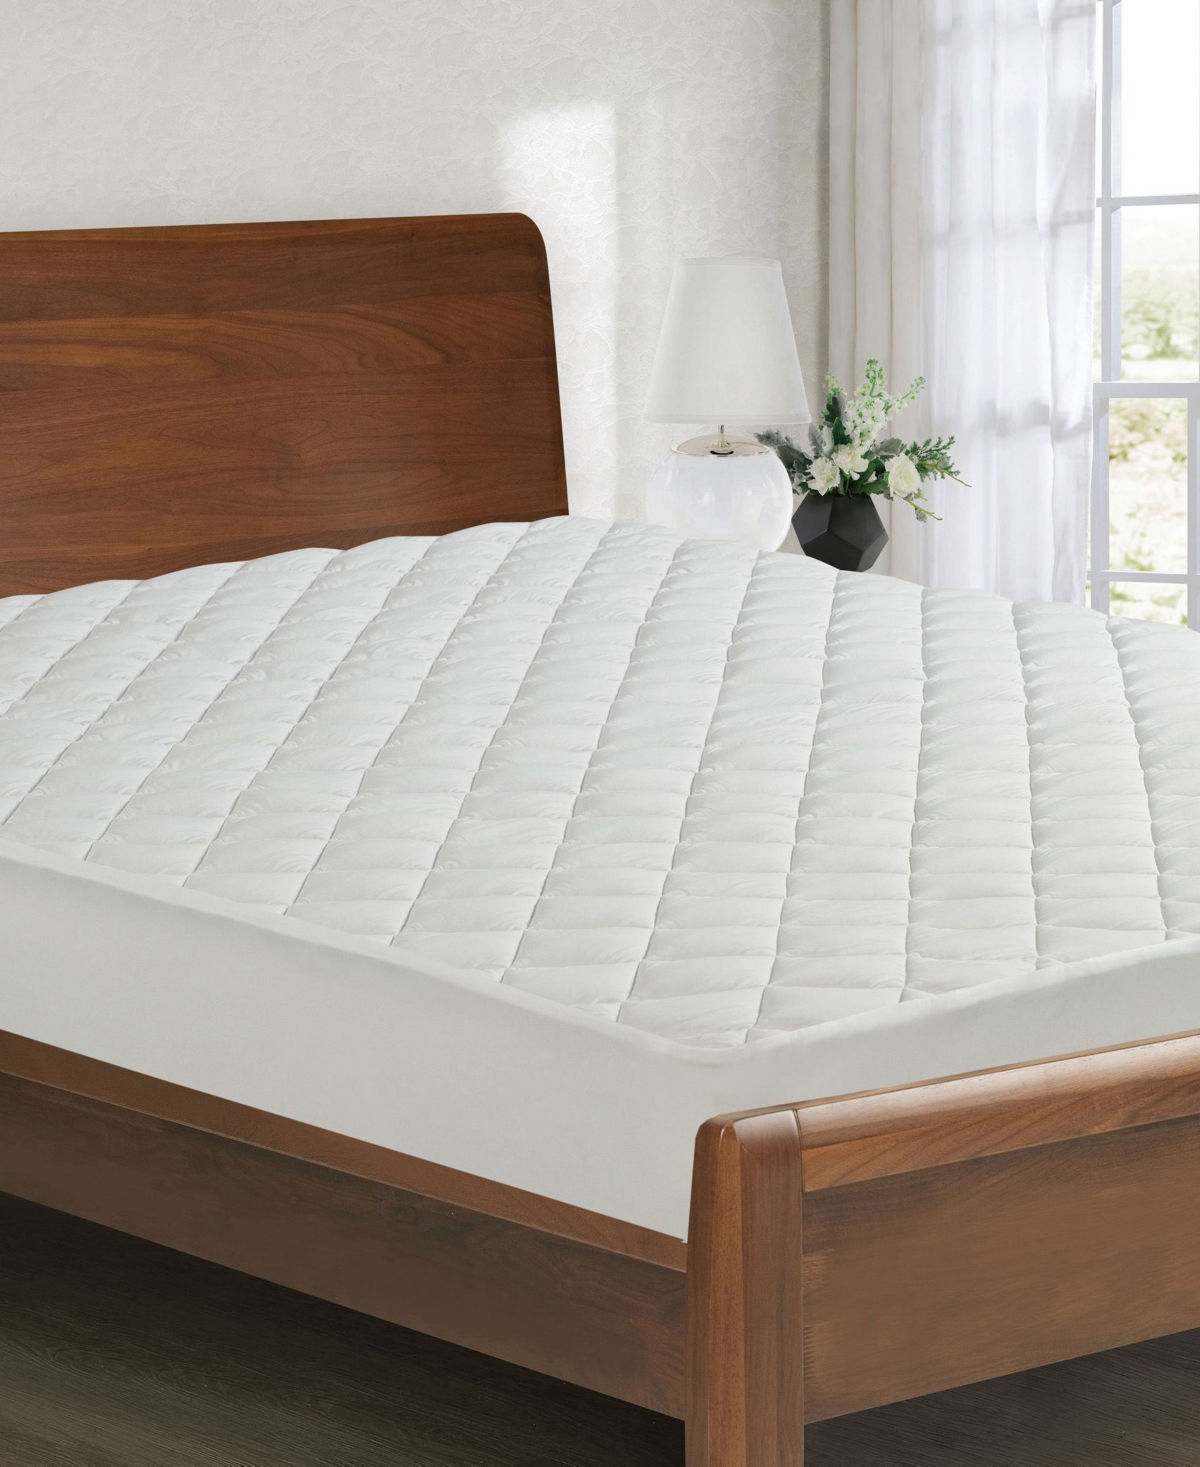 All-In-One All Season Reversible Cooling Warming Fitted Mattress Pad, Twin